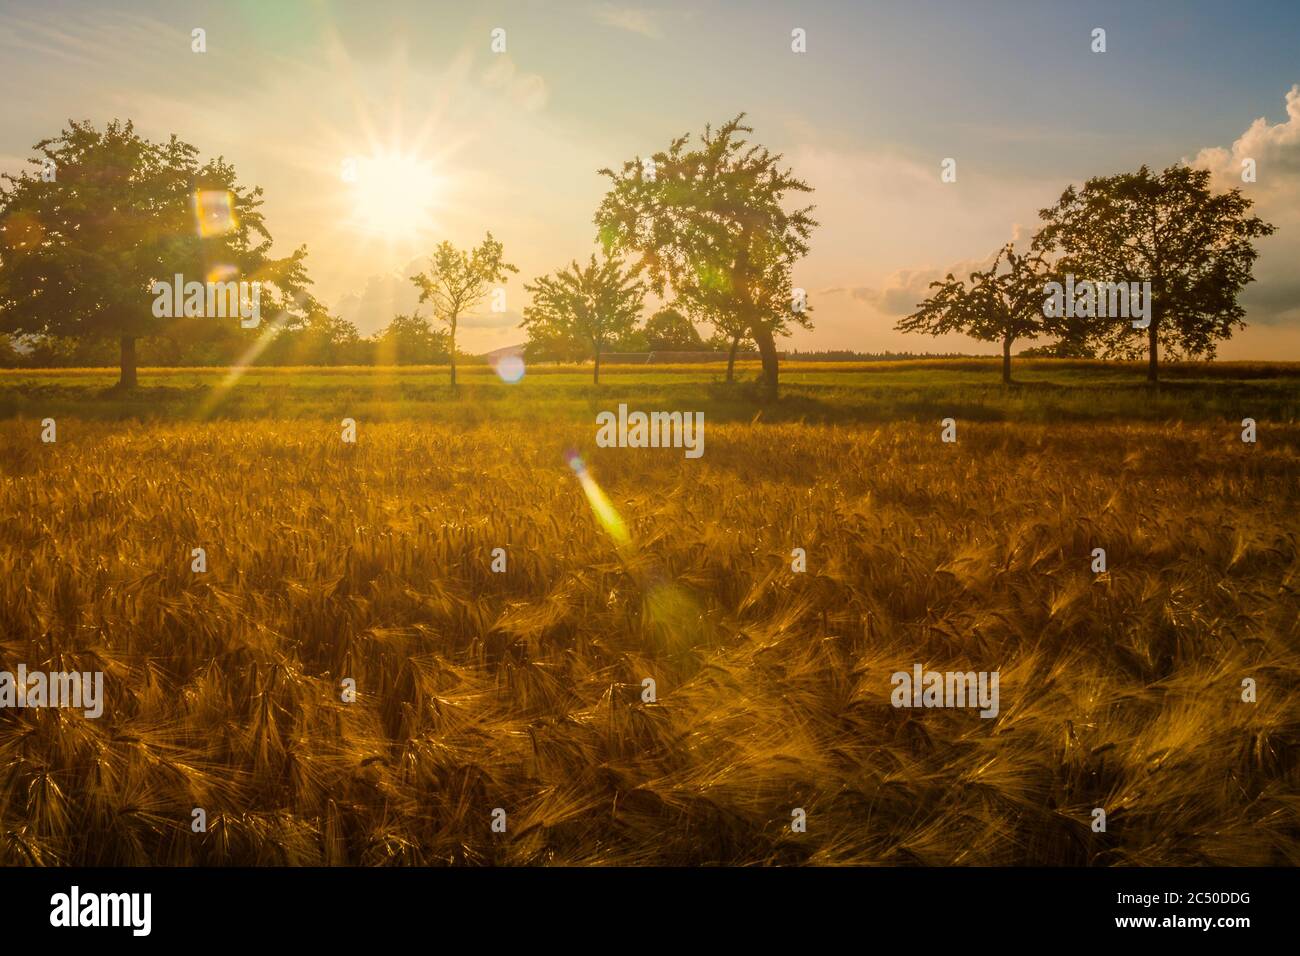 Sunlight with lens flaire over wheat field in early summer or late spring. Countryside scenery or landscape. Stock Photo